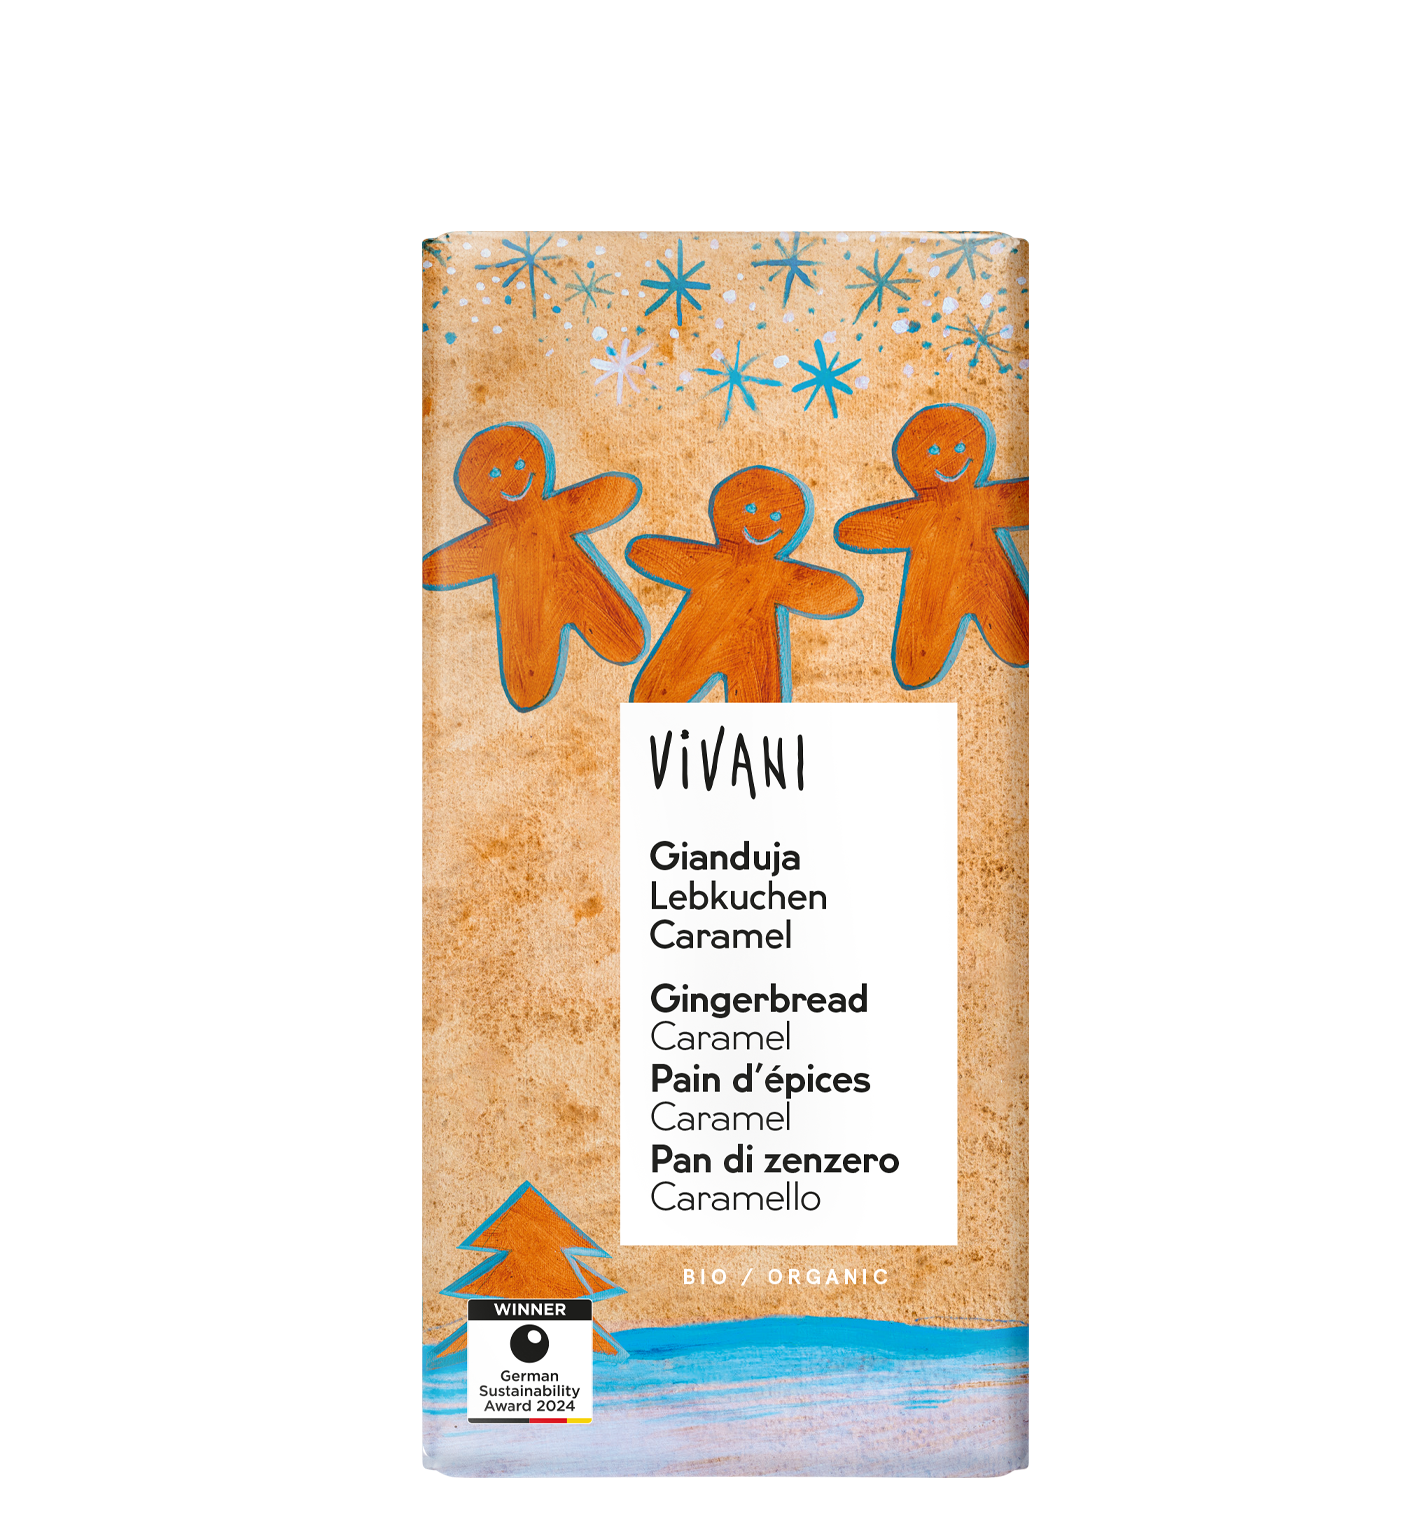 The organic Gianduja Gingerbread Caramel Christmas chocolate from VIVANI contains winter spices and gingerbread pieces